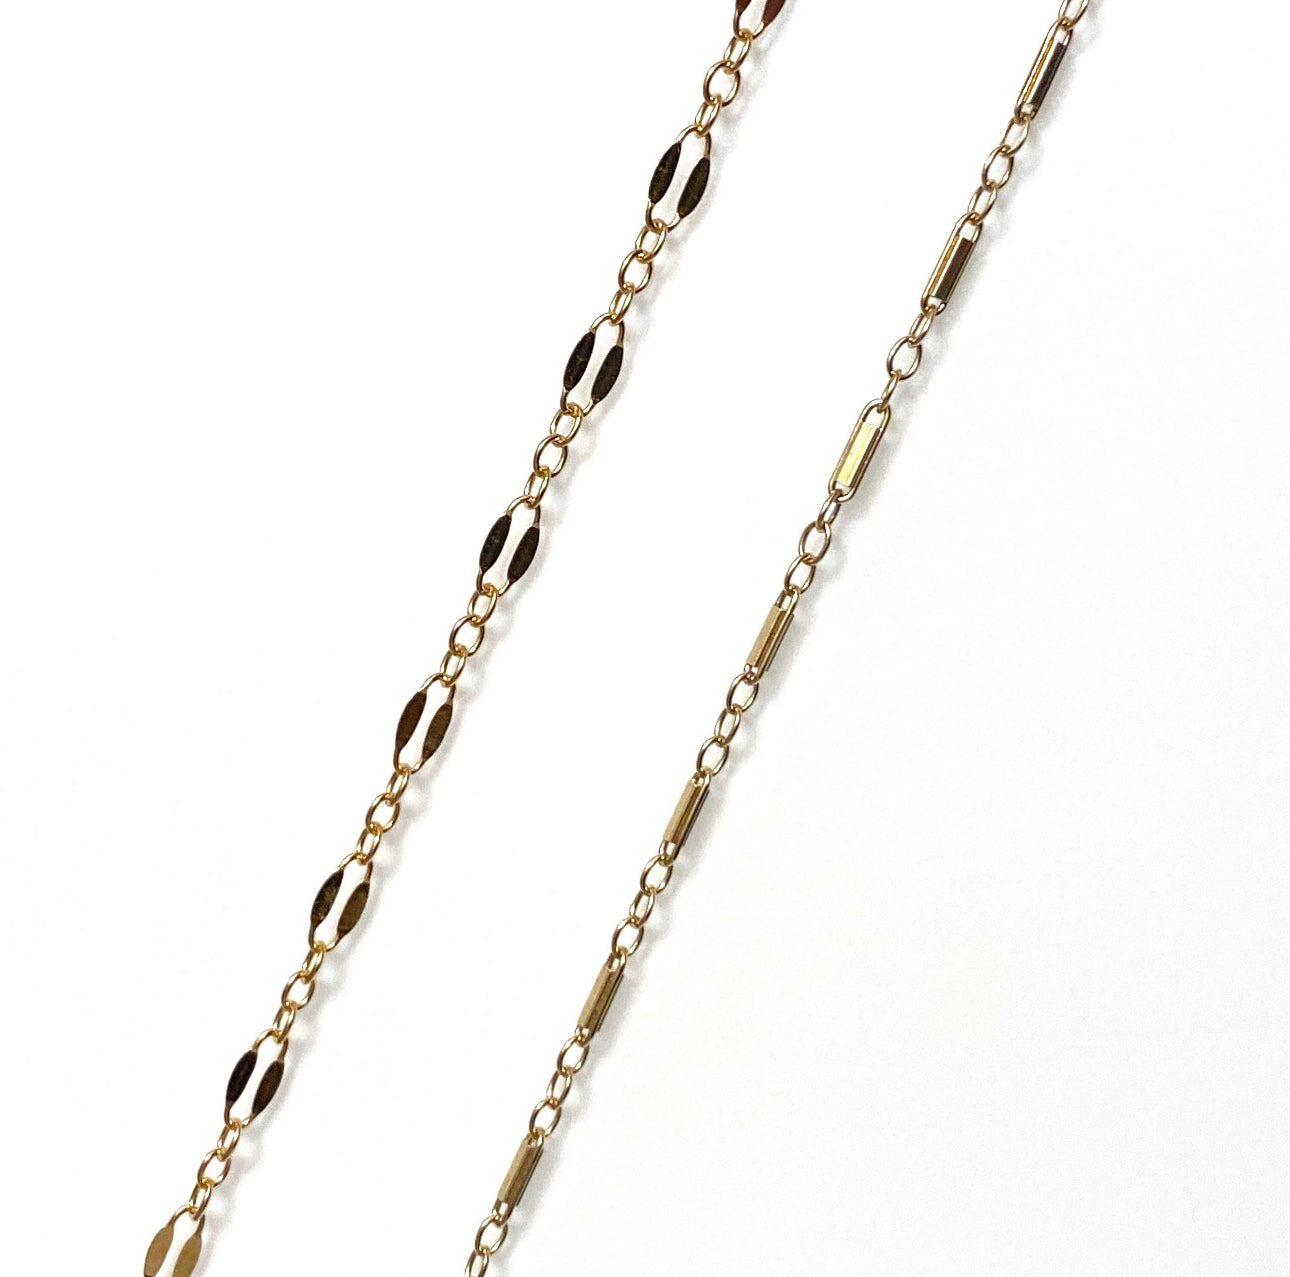 Dainty twin and gold bar chains (14K gold-filled, shower safe)